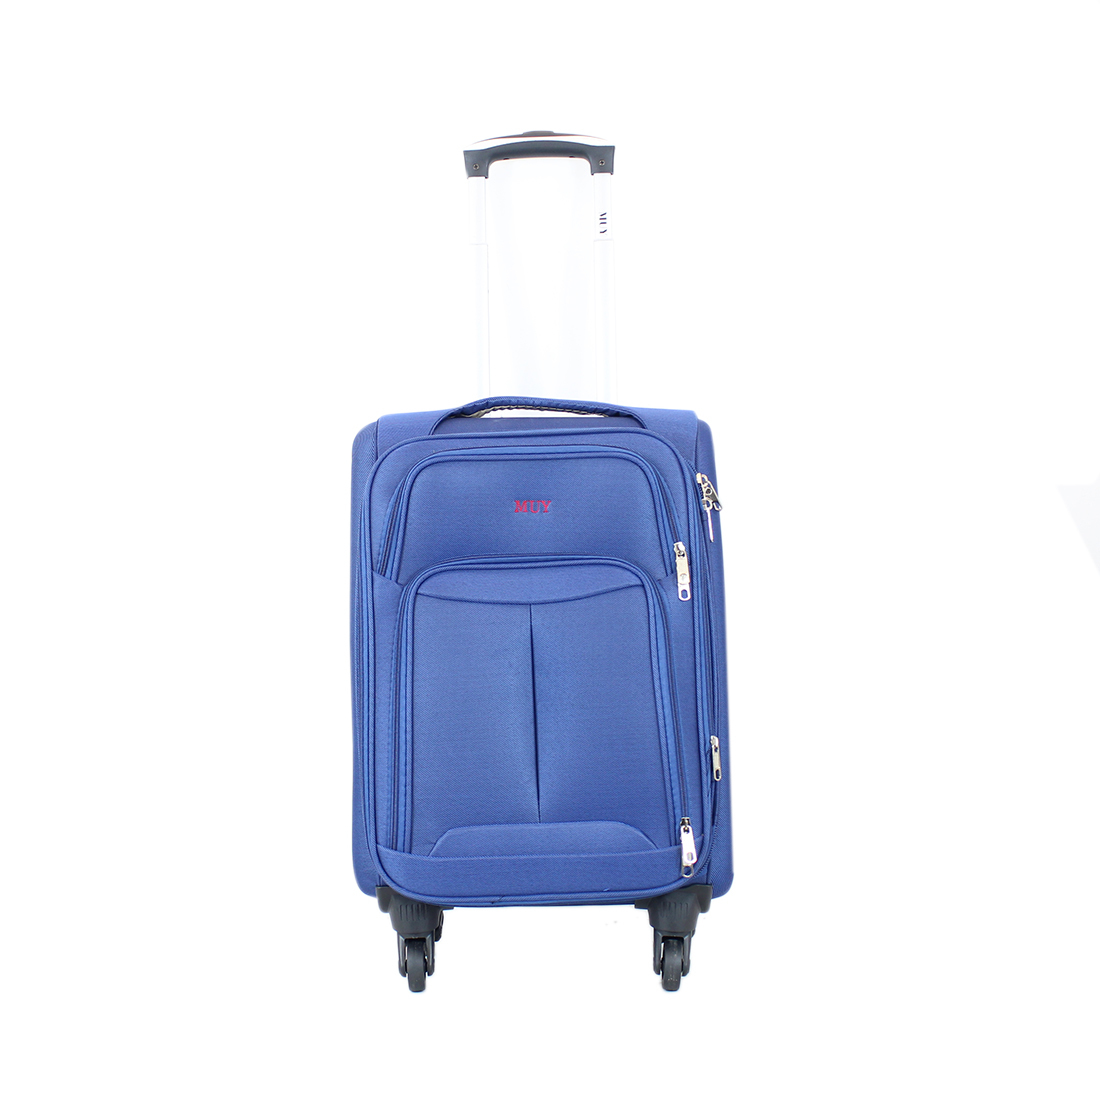 Textile with 4 wheels, Expandable & Light Weight